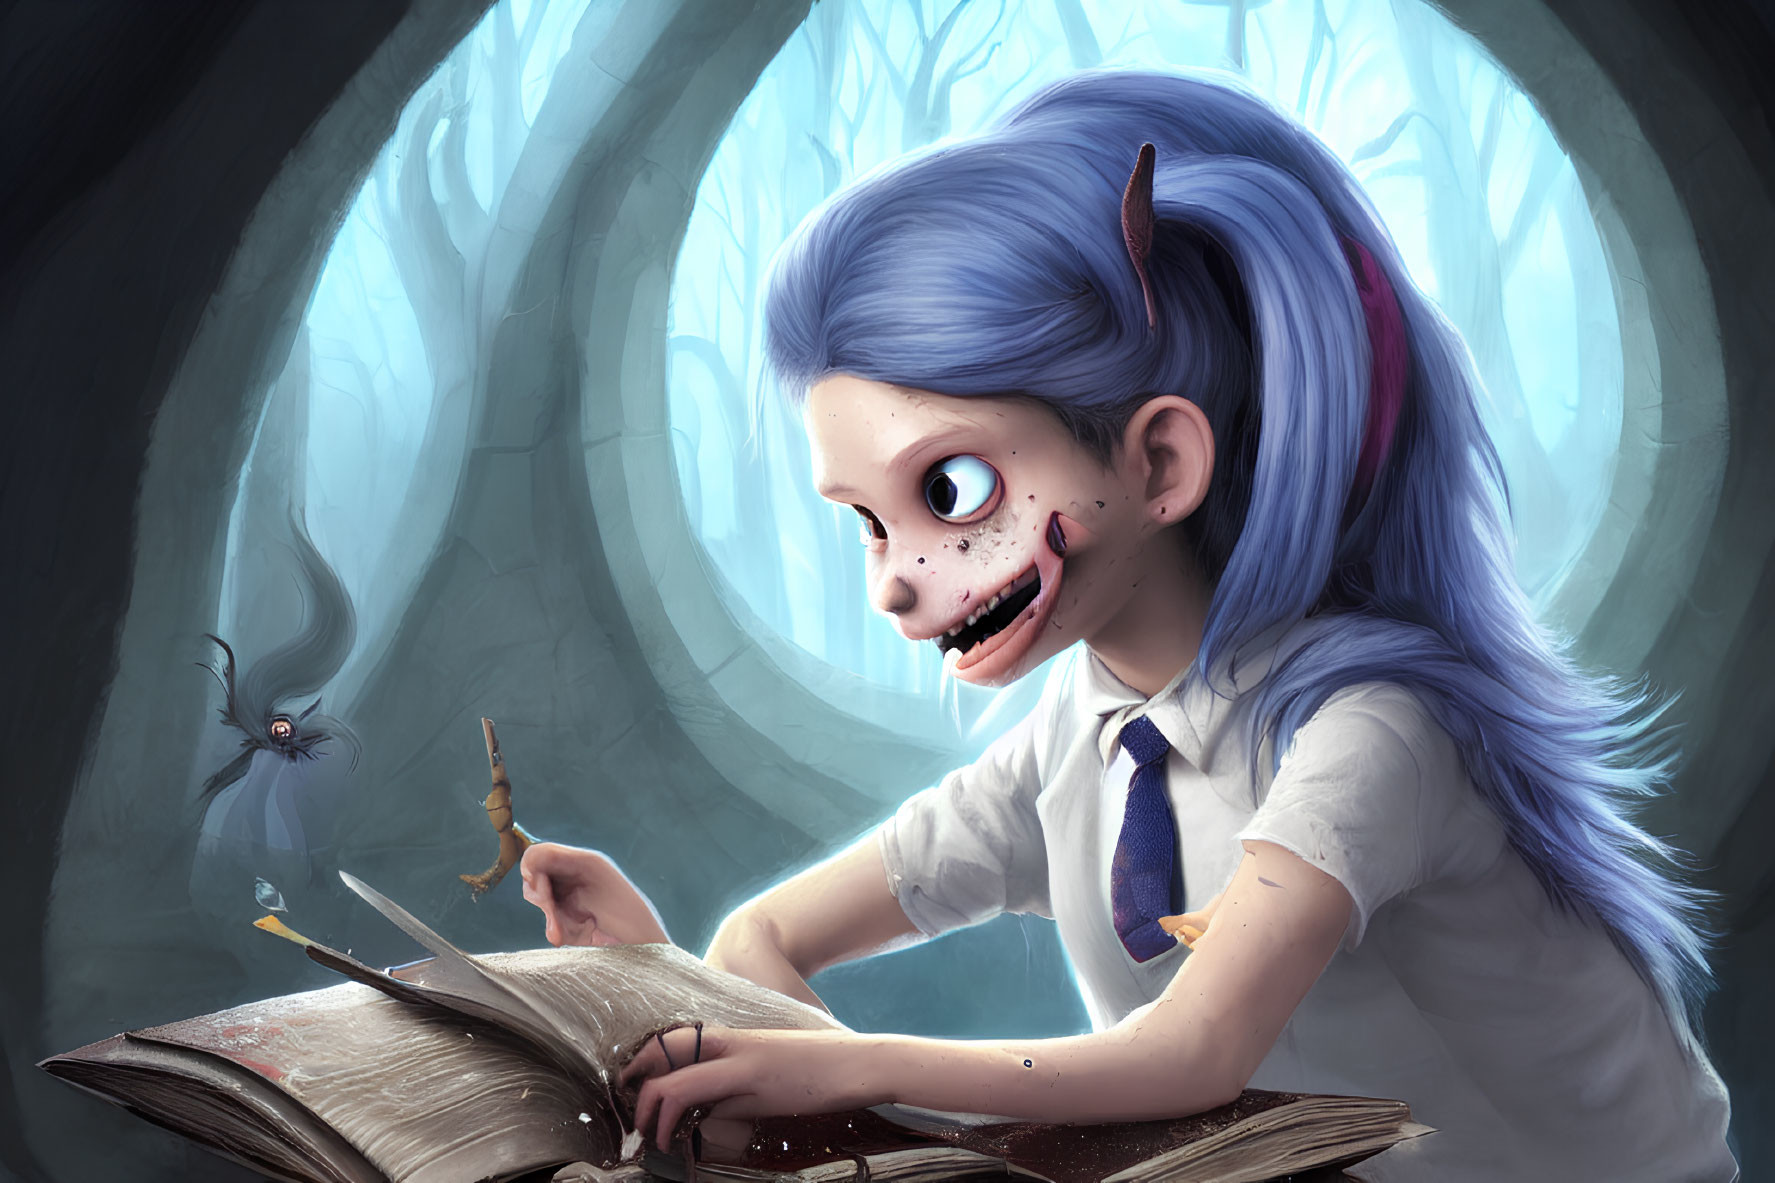 Blue-Haired Girl with Horns Reading Book in Forest with Winged Creature